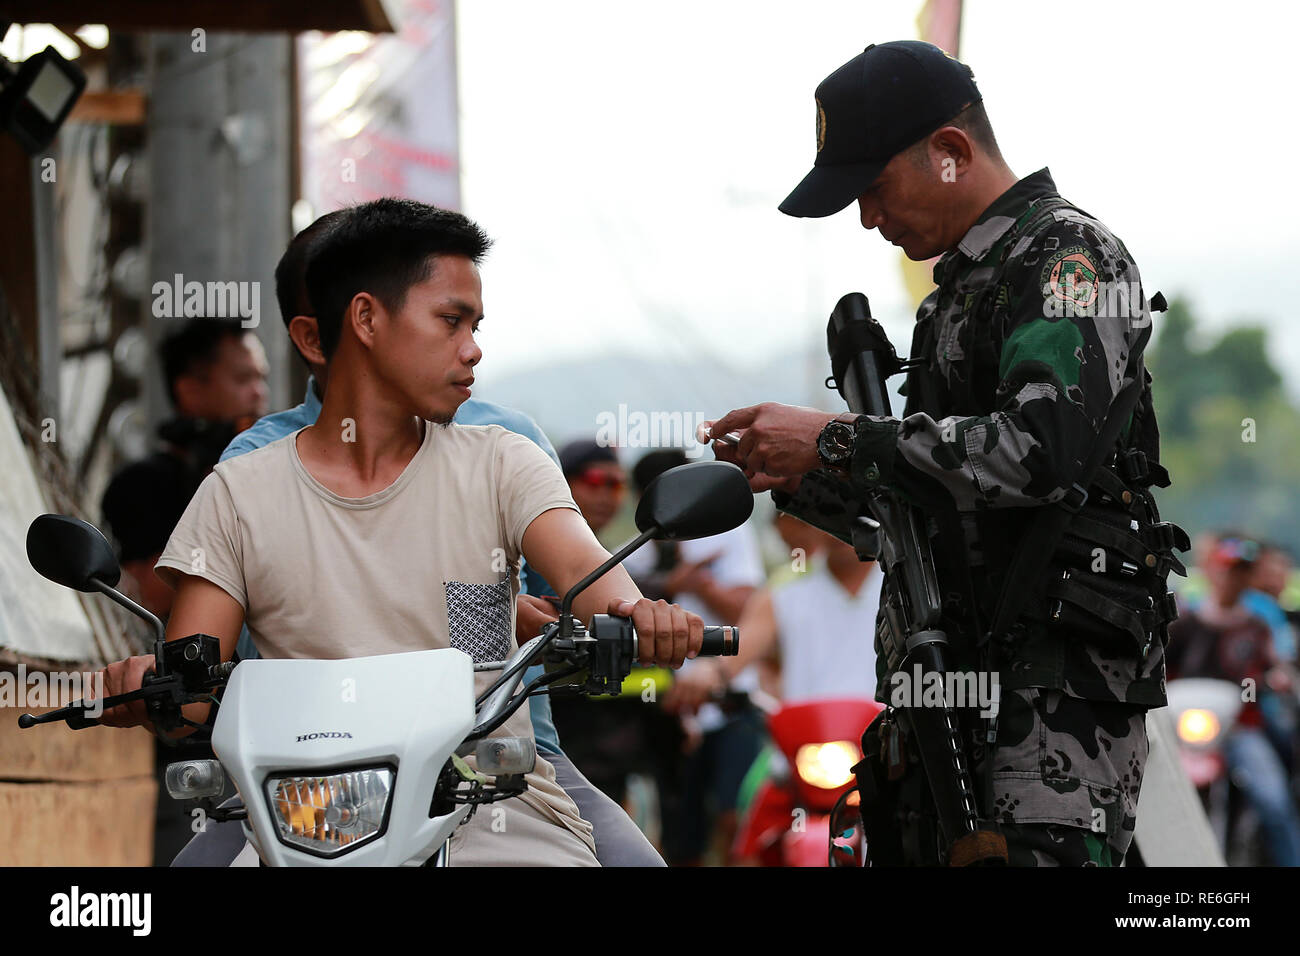 Cotabato City, Philippines. 20th Jan, 2019. A policeman from the Philippine National Police inspects the identification cards of motorists during a security check at a road in Cotabato City, the Philippines, Jan. 20, 2019. Muslim Filipinos will cast their vote on Monday to ratify the landmark Bangsamoro Organic Law (BOL), a law that will pave the way for wider self-rule to the Muslim minority in the Philippines and is hoped to end the decades-old conflict in southern Philippines. Credit: Rouelle Umali/Xinhua/Alamy Live News Stock Photo